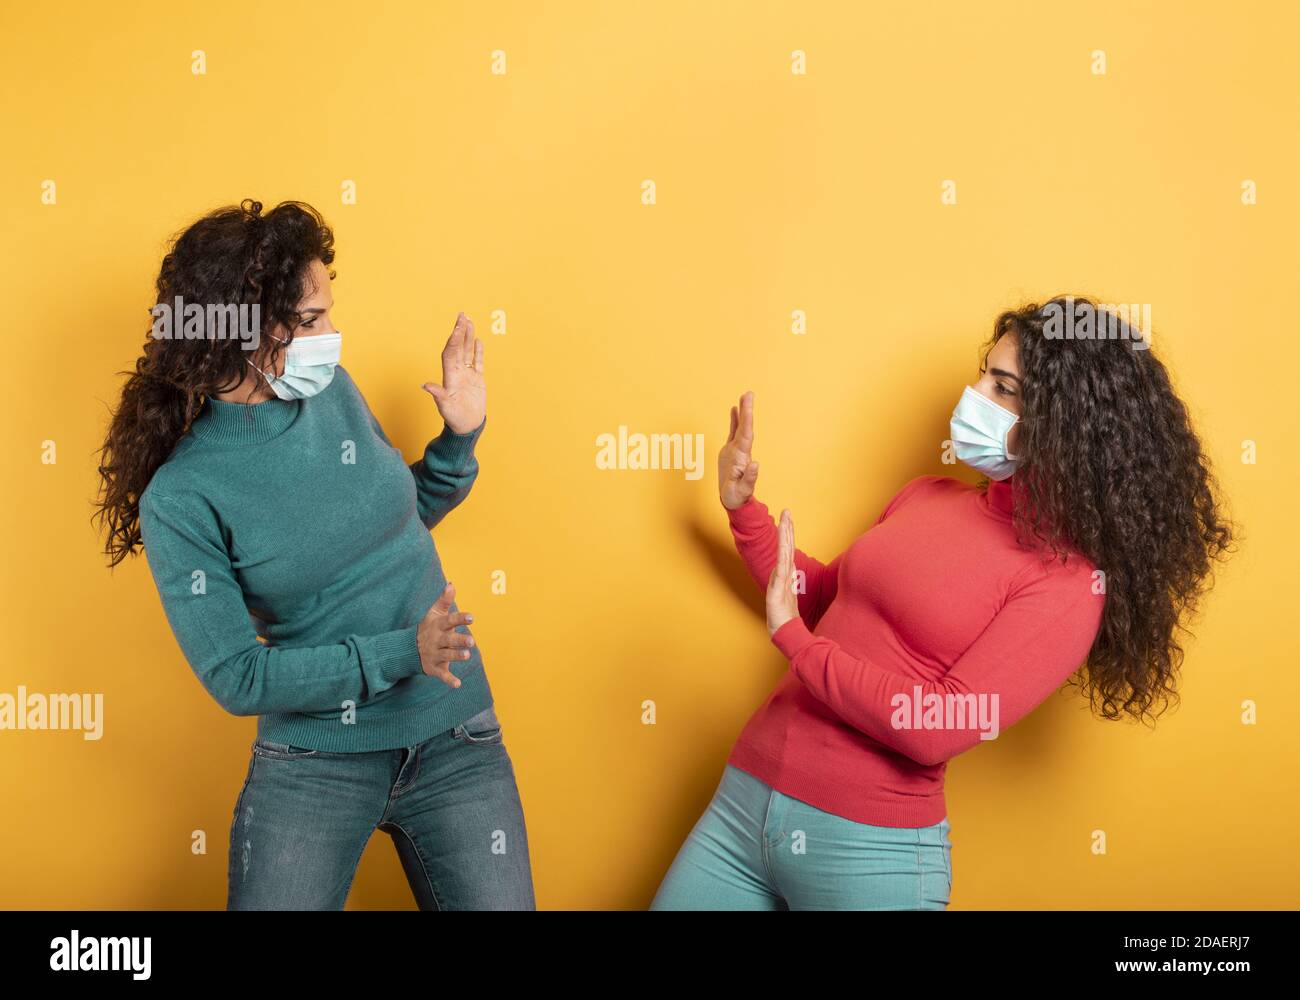 Friends stay away to avoid contact and contagion of the virus. Concept of codiv-19 rules to avoid pandemic. yellow background Stock Photo